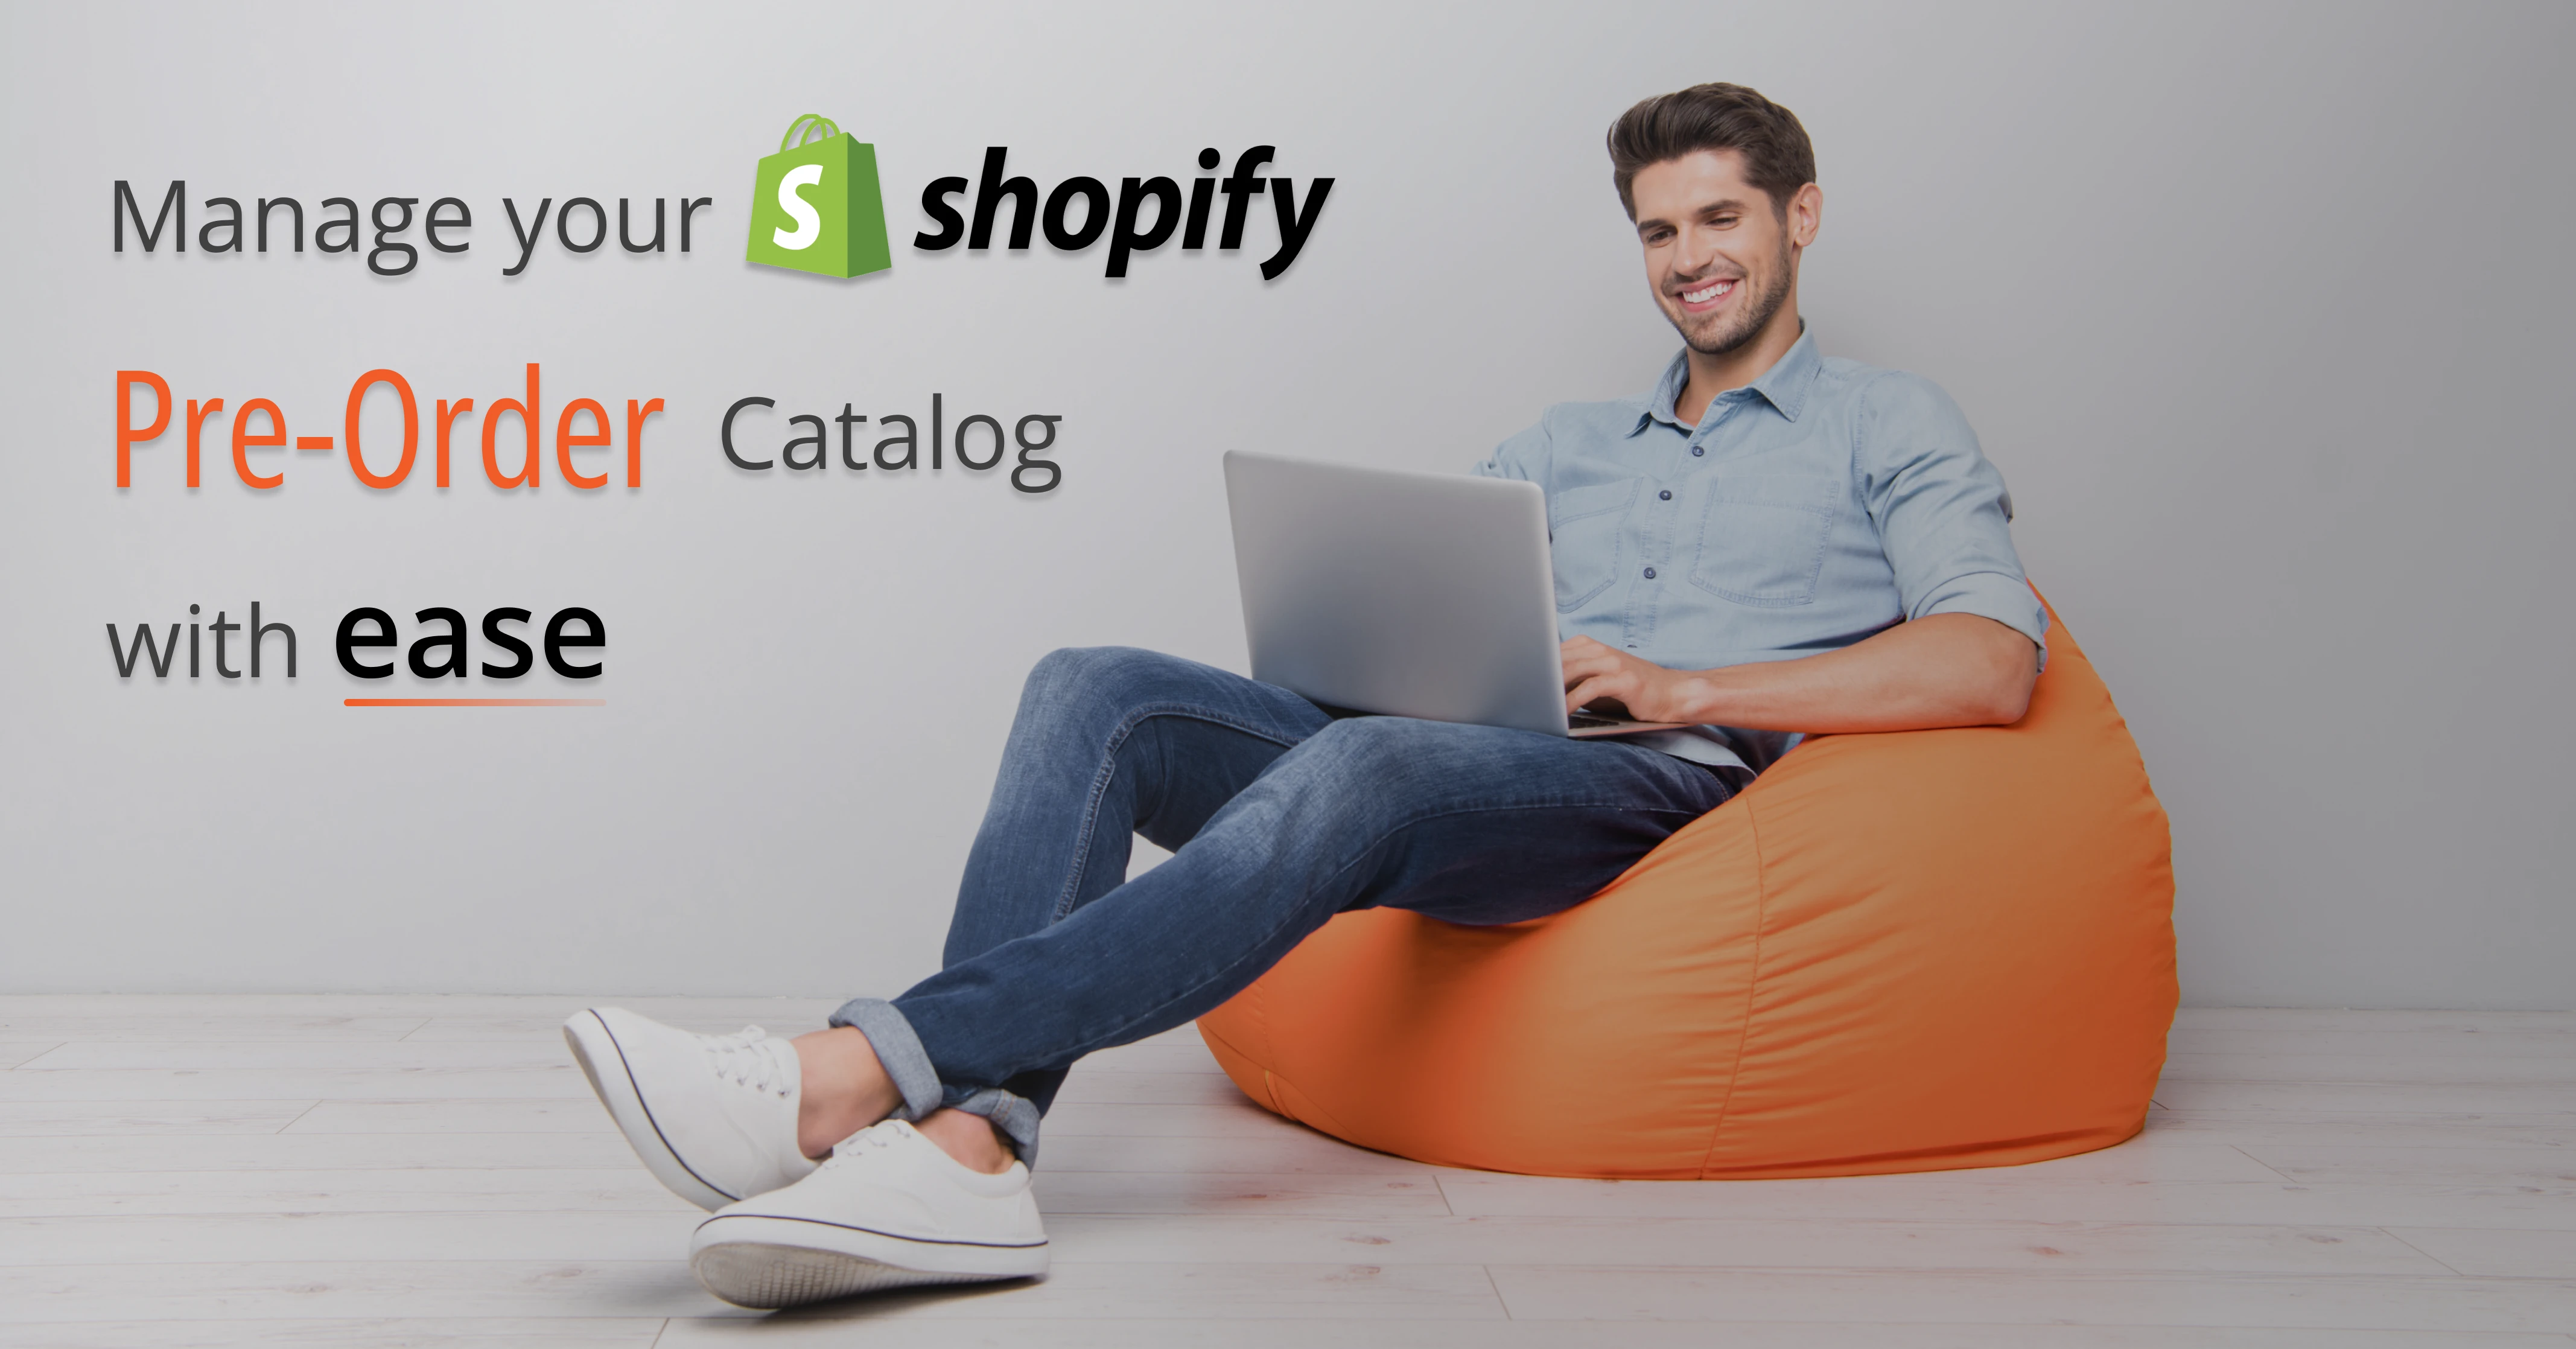 How to Manage Shopify Pre-Order Catalog with Ease?